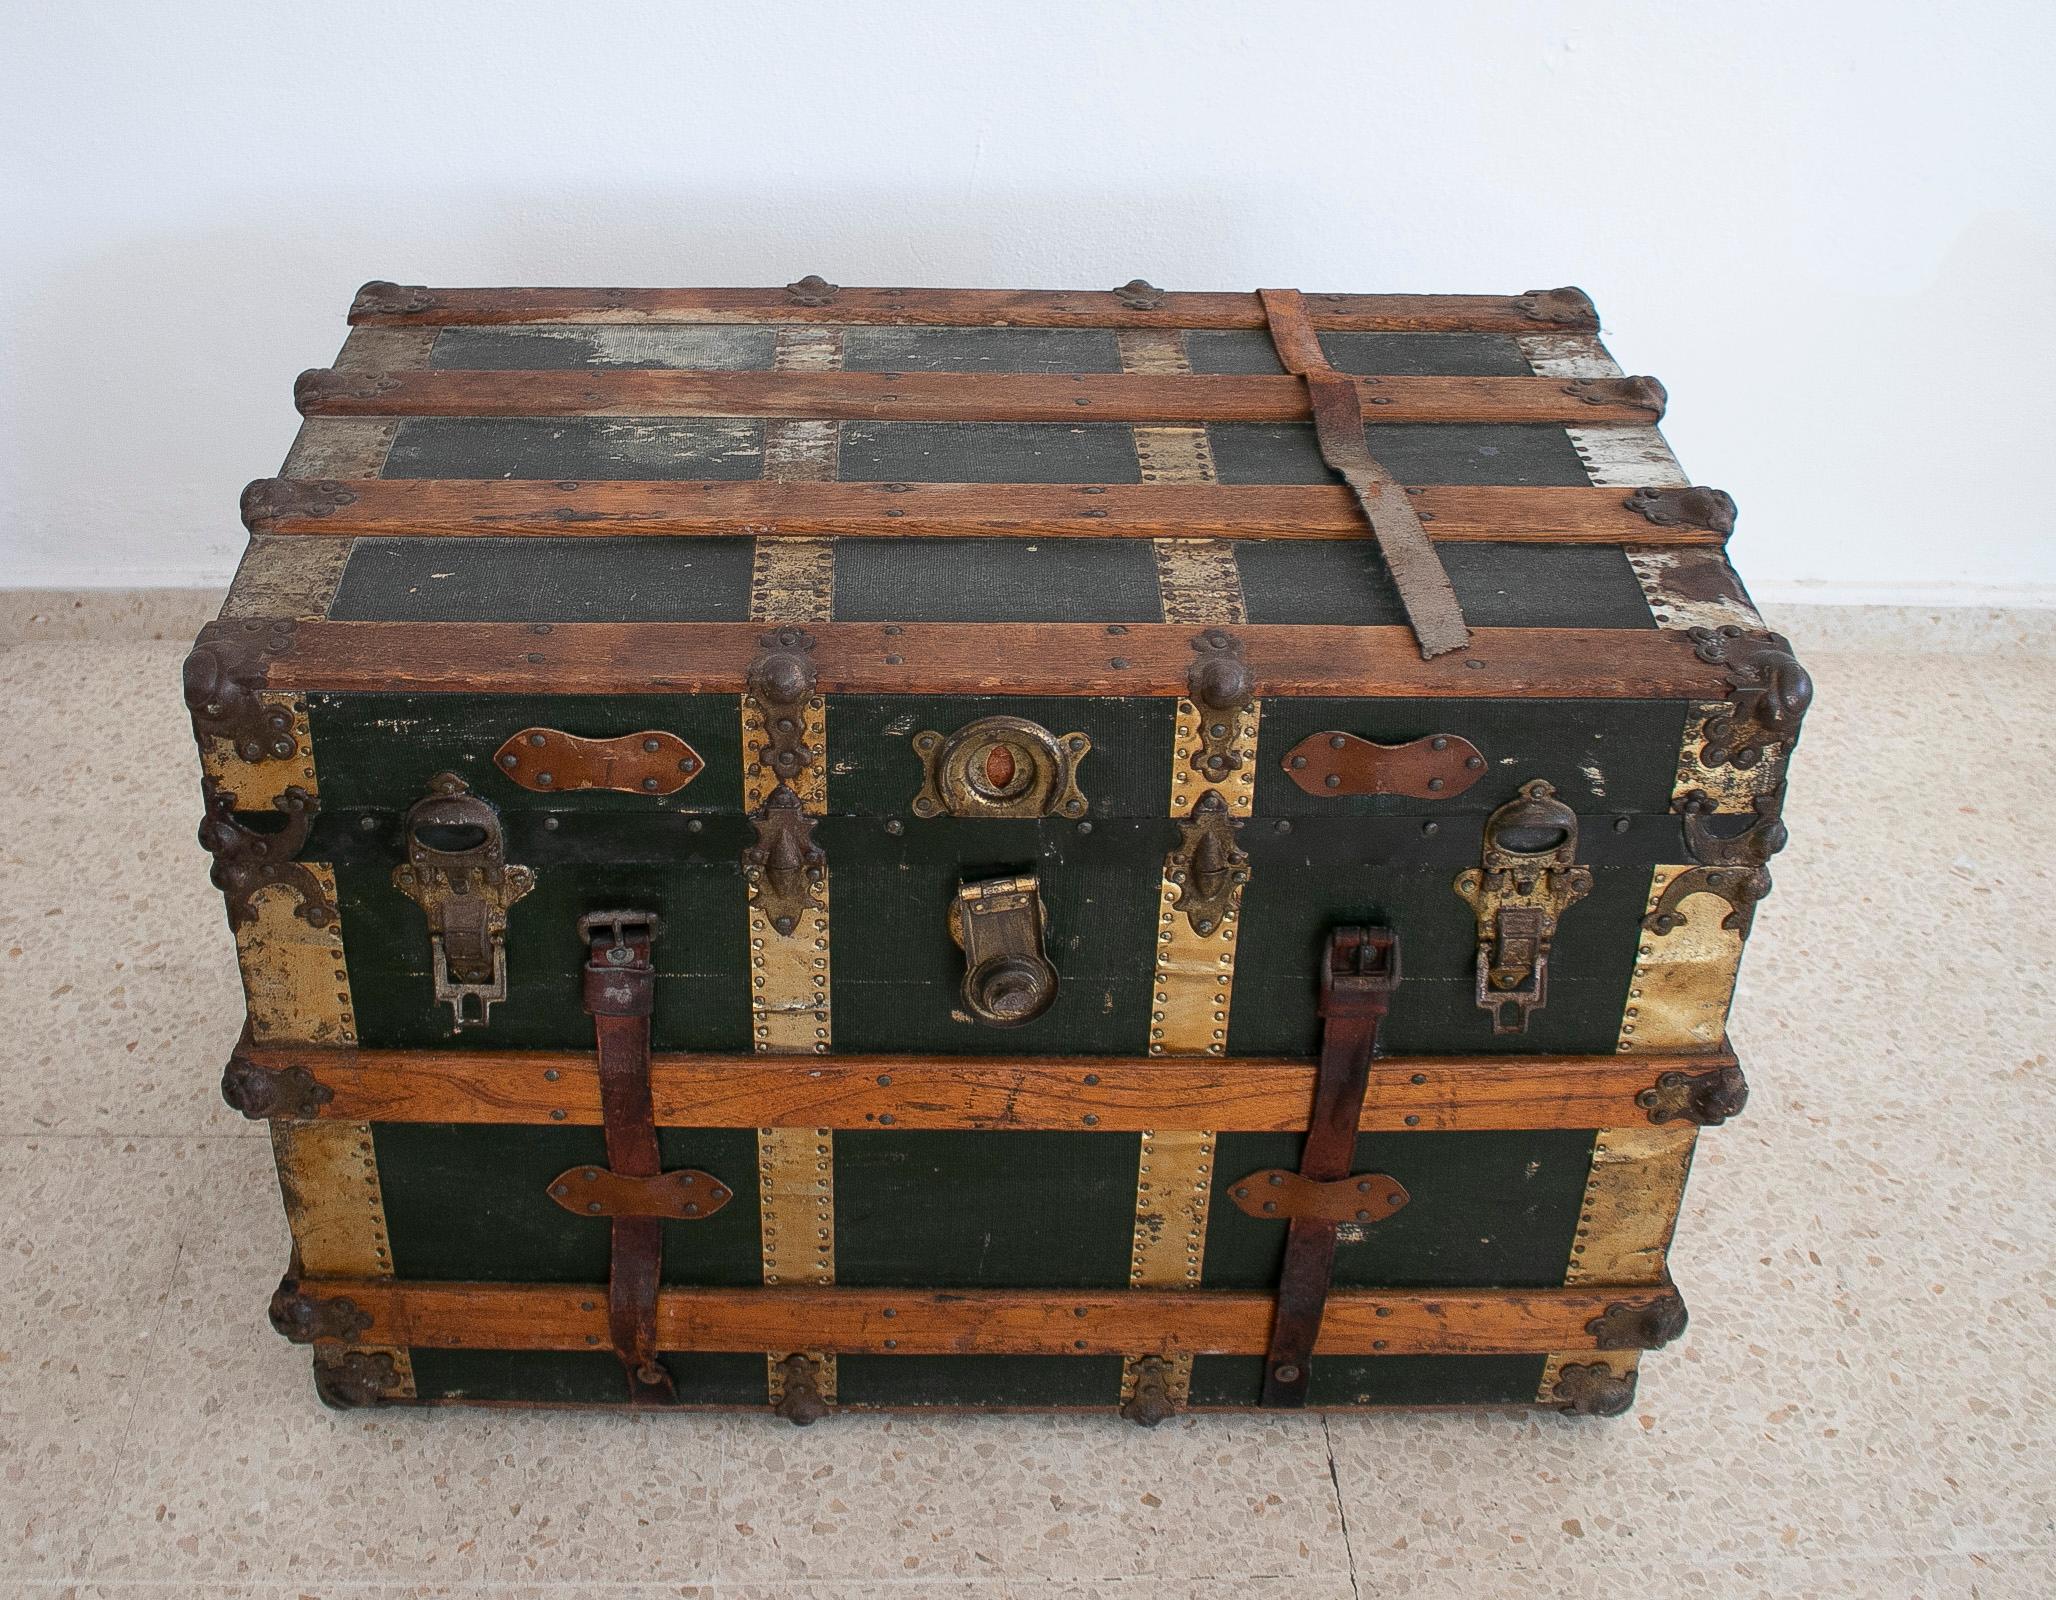 20th Century 1940s Spanish Leather & Wood Travel Trunk w/ Initials